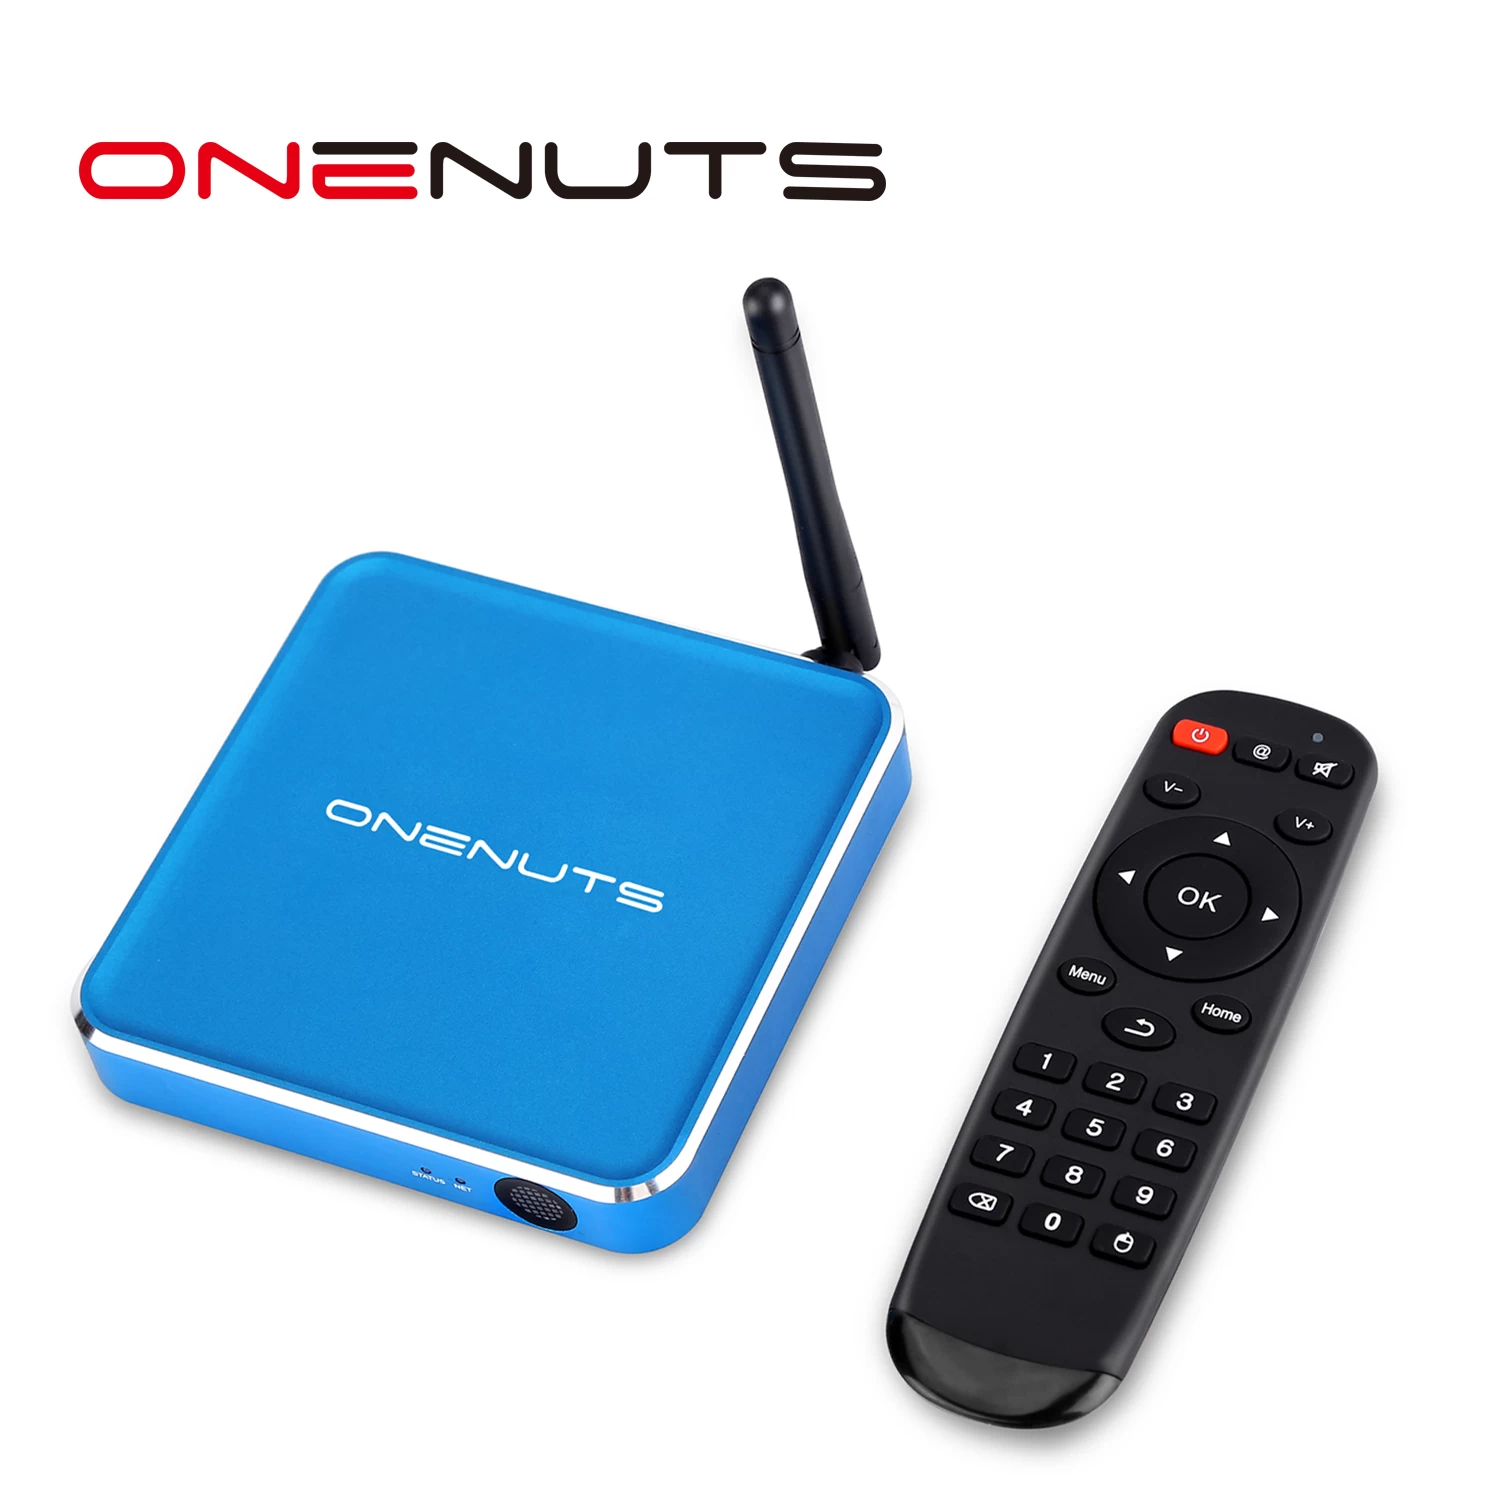 2-in-1 Octa Core Streaming Media Player & Game Android TV Box مع Android 6.0 Marshmallow 2G DDR3 16G eMMC Dual-AC AC WIFI يدعم KODI YouTube Netflix Facebook وغيرها الكثير - Onenuts Nut 1 Blue